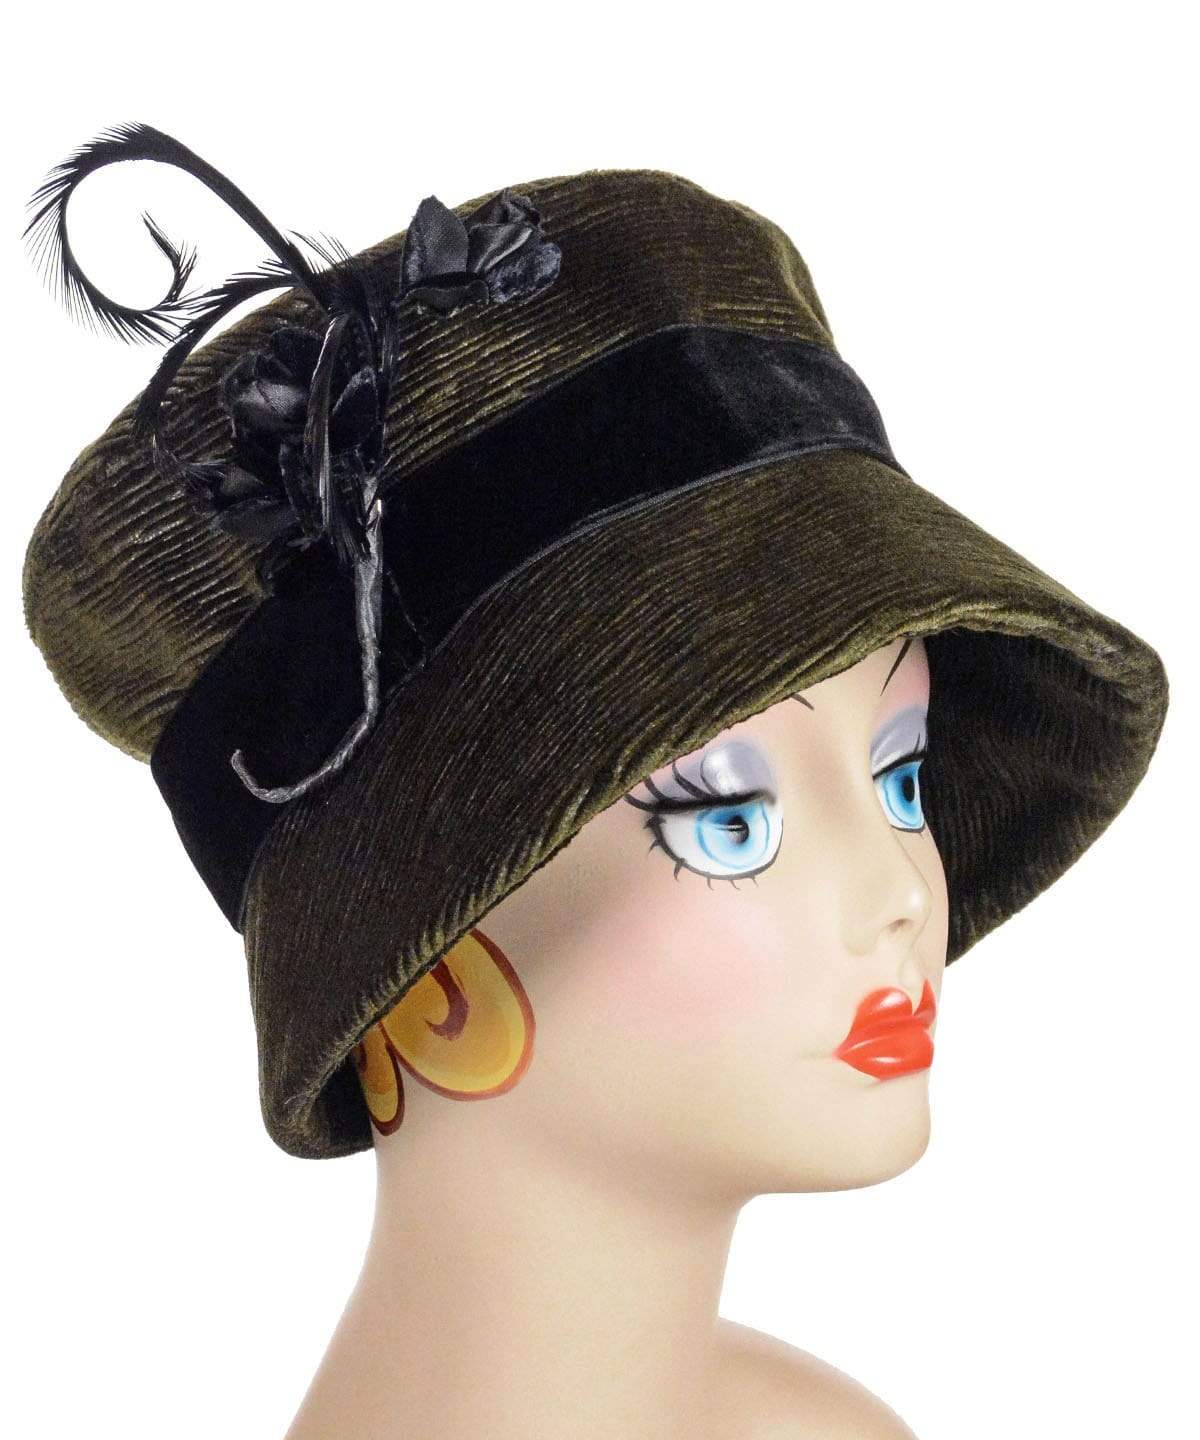  Molly Bucket Style Hat Cohen in Olive Upholstery with Velvet Band featuring Black Velvet Flower Brooch | Handmade By Pandemonium Millinery | Seattle WA